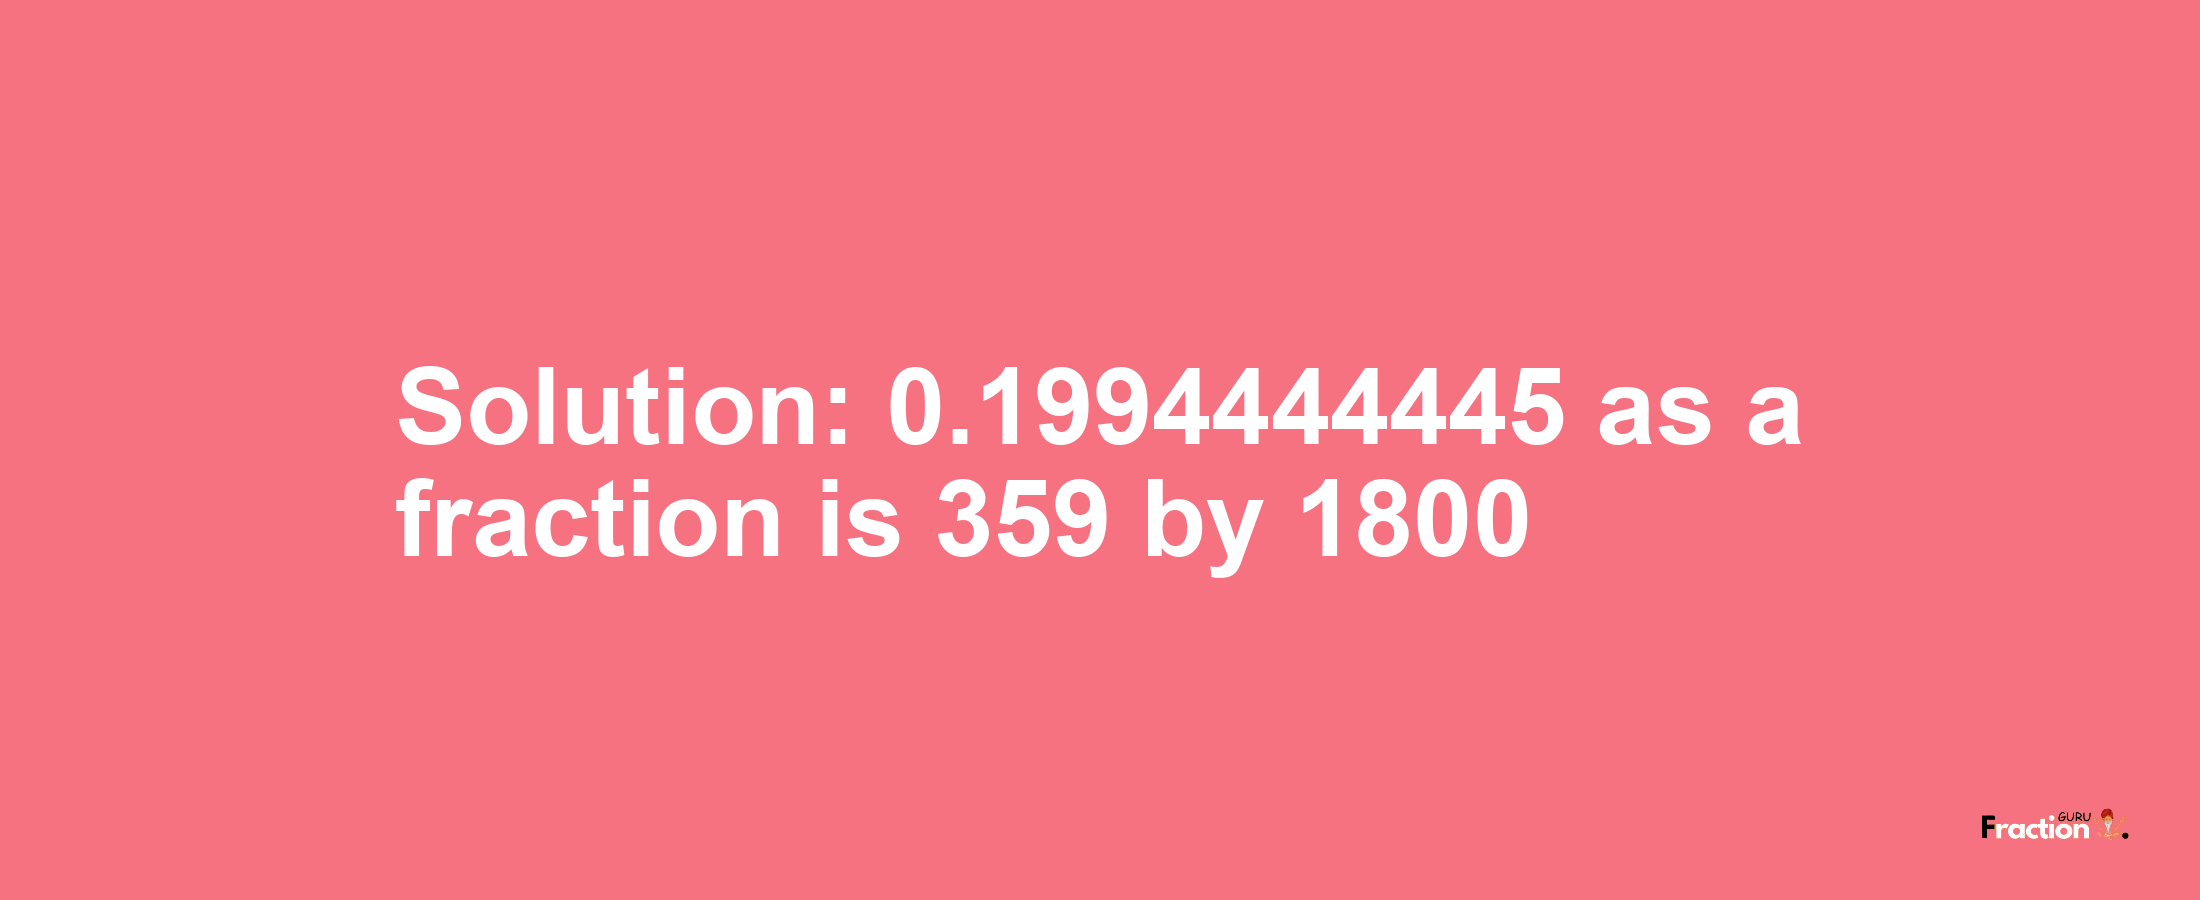 Solution:0.1994444445 as a fraction is 359/1800